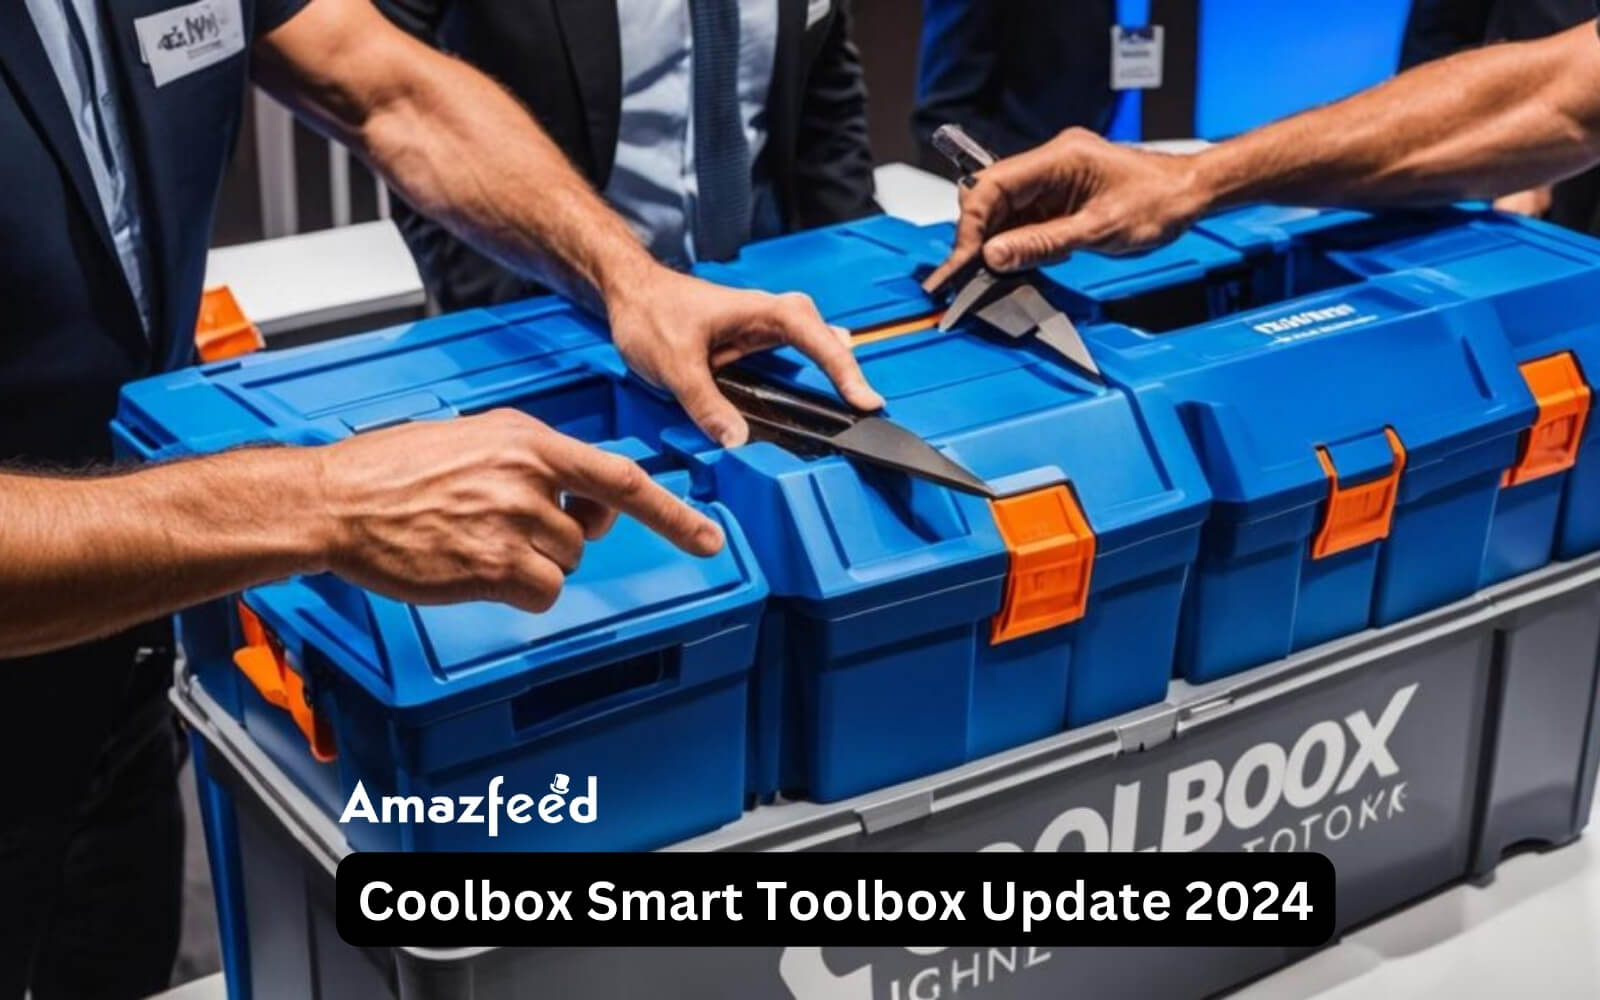 Coolbox Smart Toolbox Update 2024